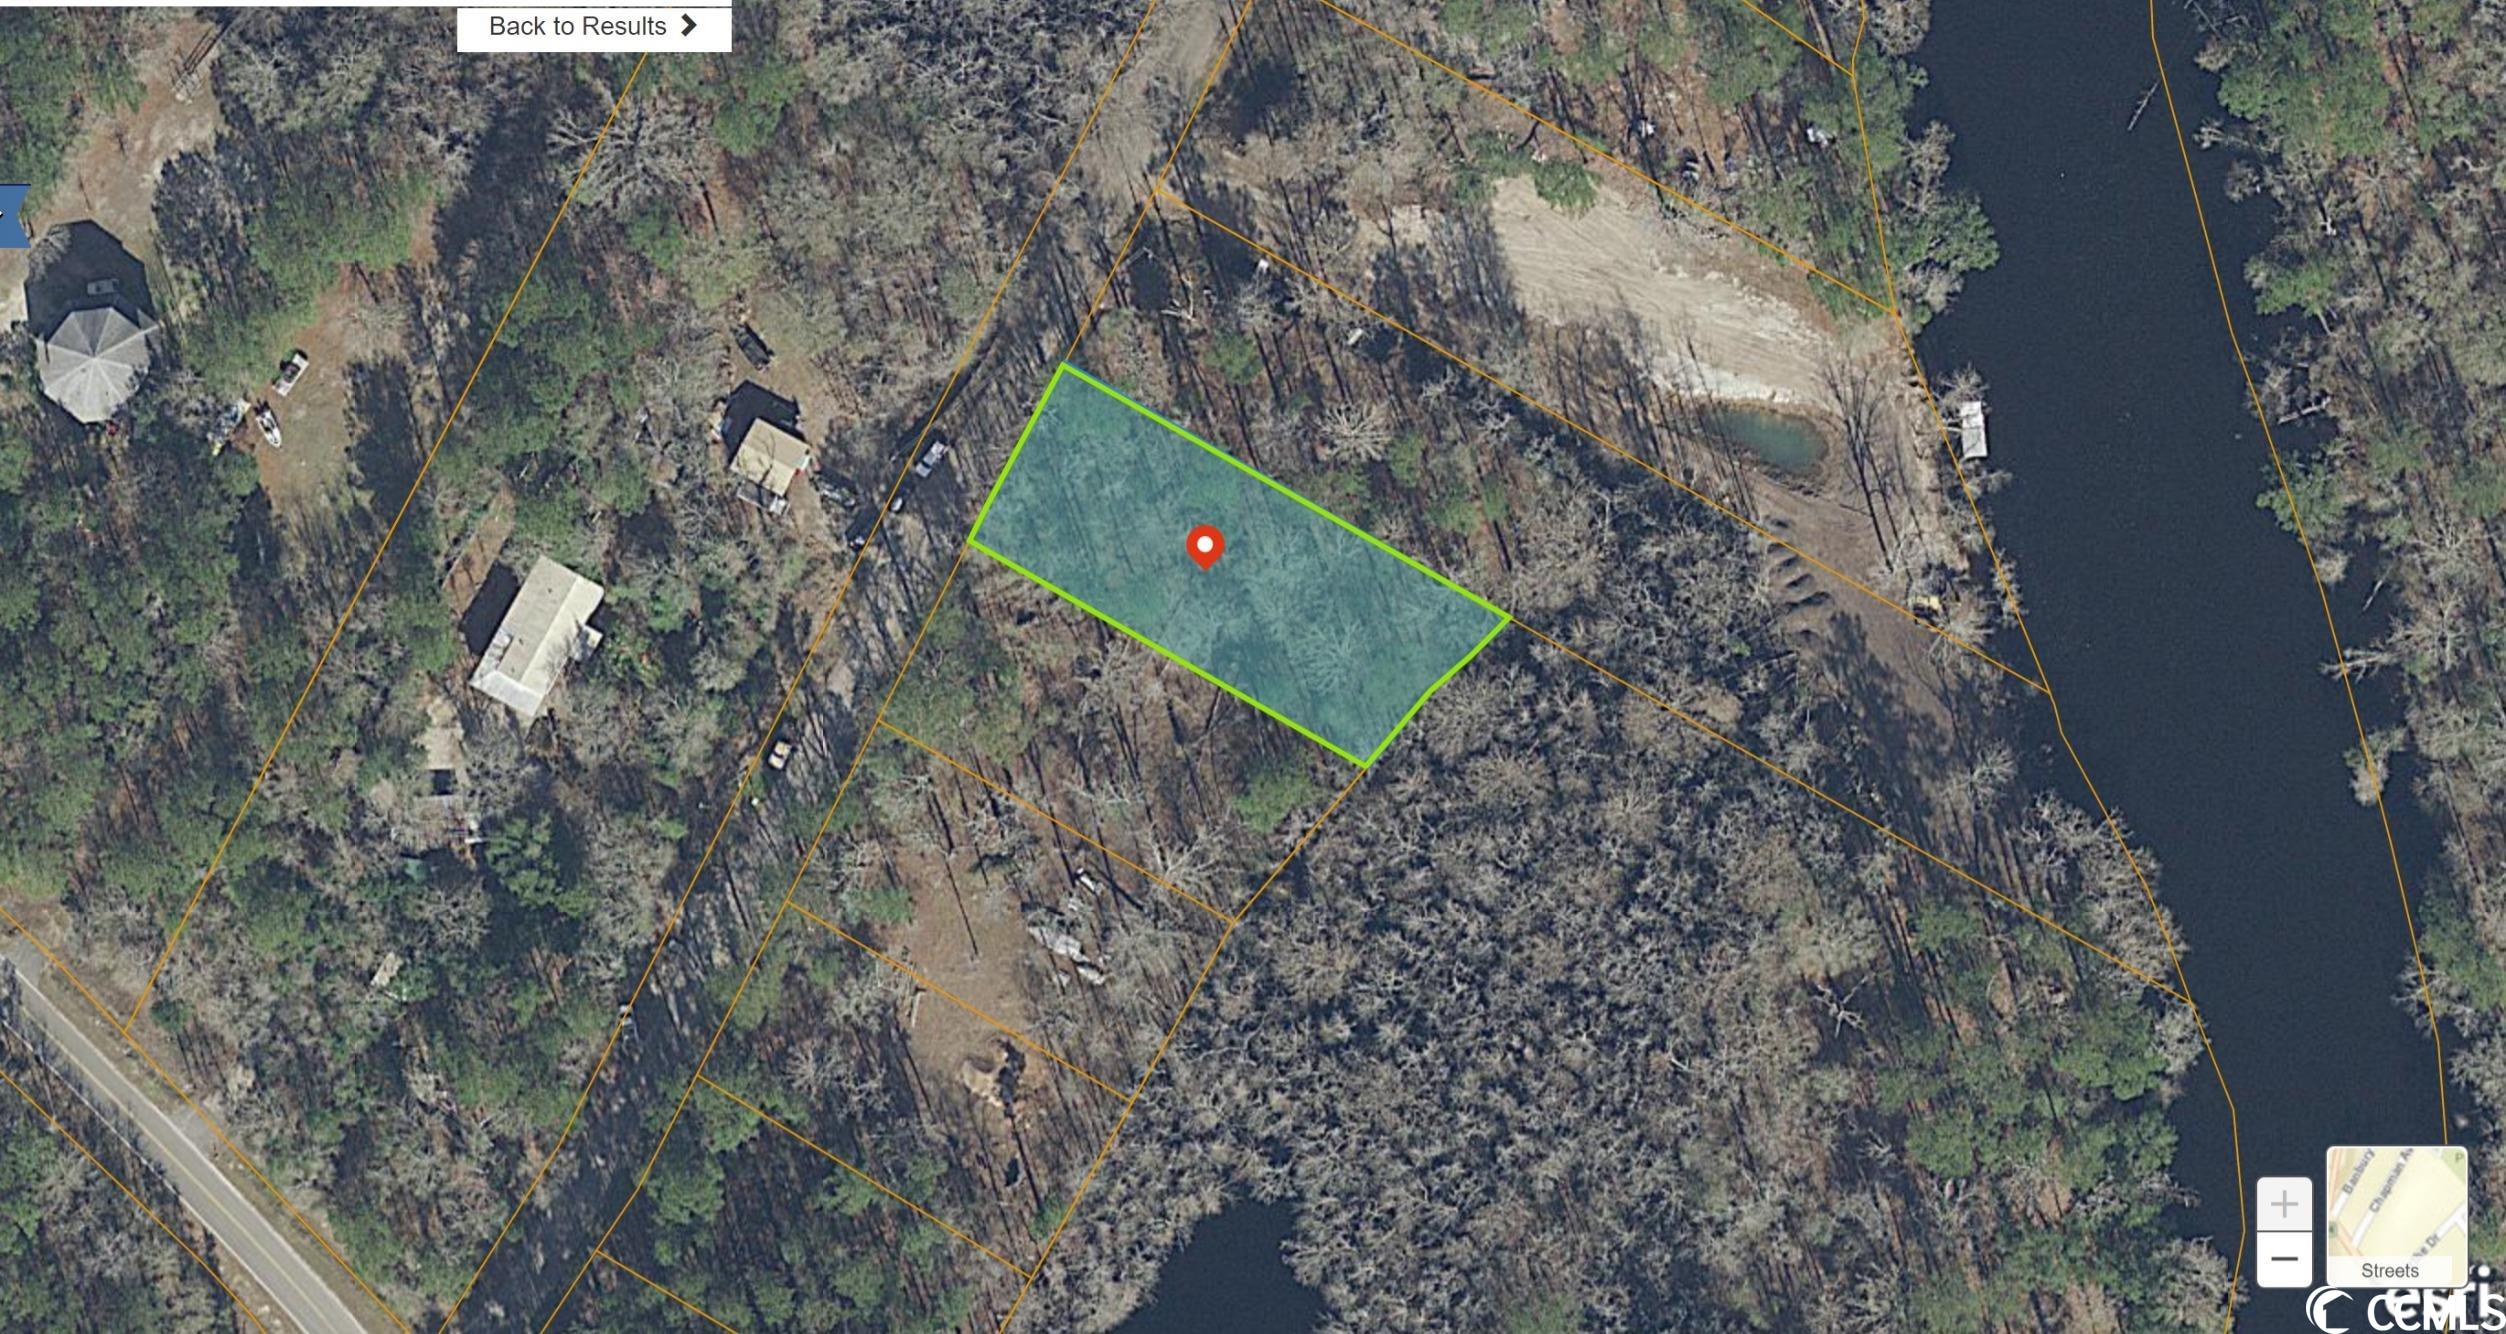 .44 acre lot located close the waccamaw river. come build your dream home and enjoy the privacy this lot offers. no hoa, perfect for the someone who enjoys fishing and the outdoors. come view and fall in love with the perfect place to build your dream home.